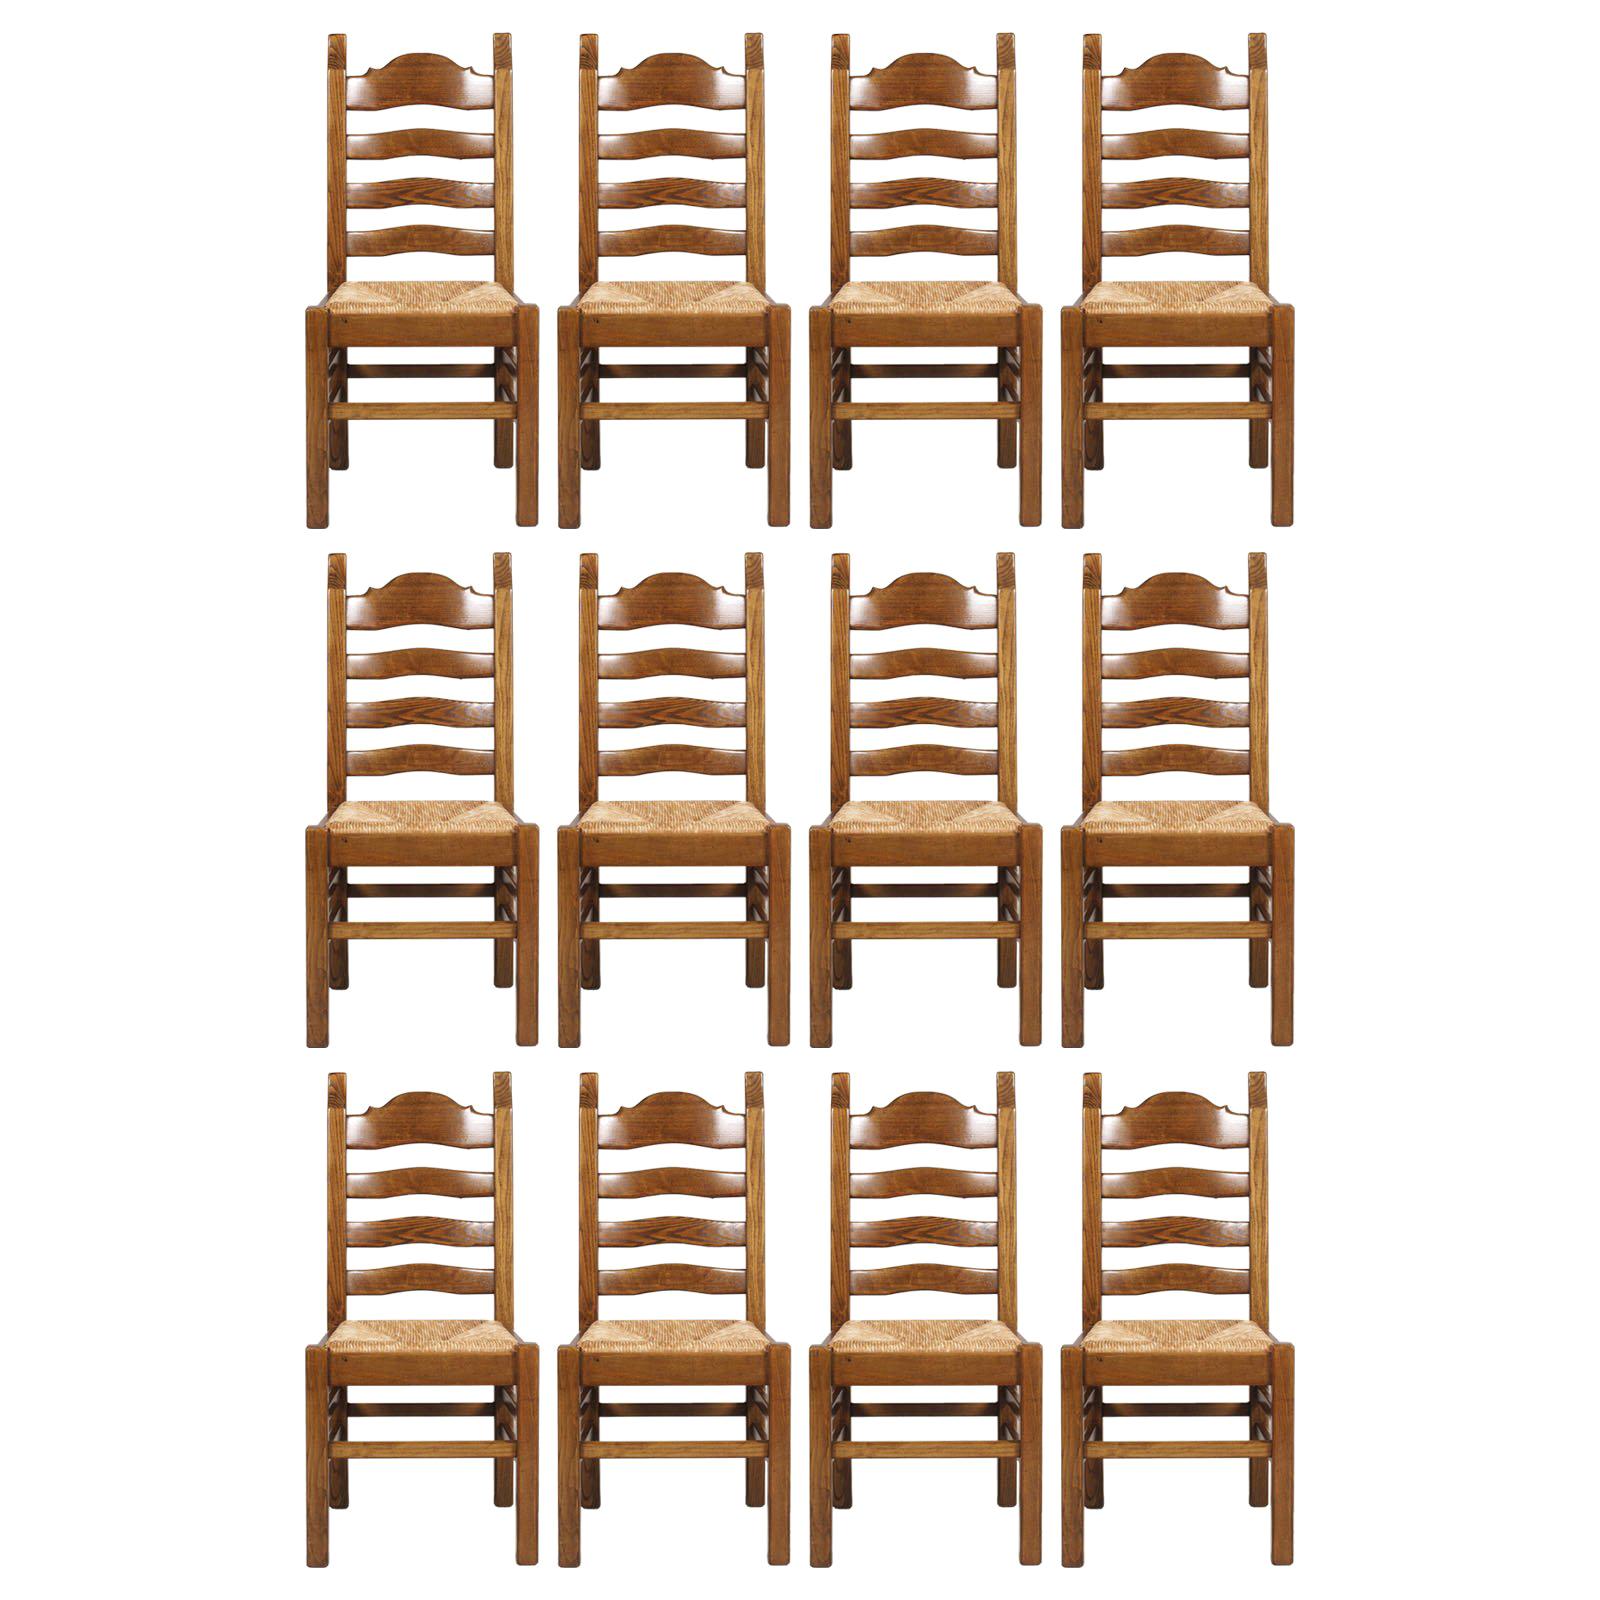 Tuscany Renaissance, Hand Carved Solid Walnut Twelve Straw Chairs